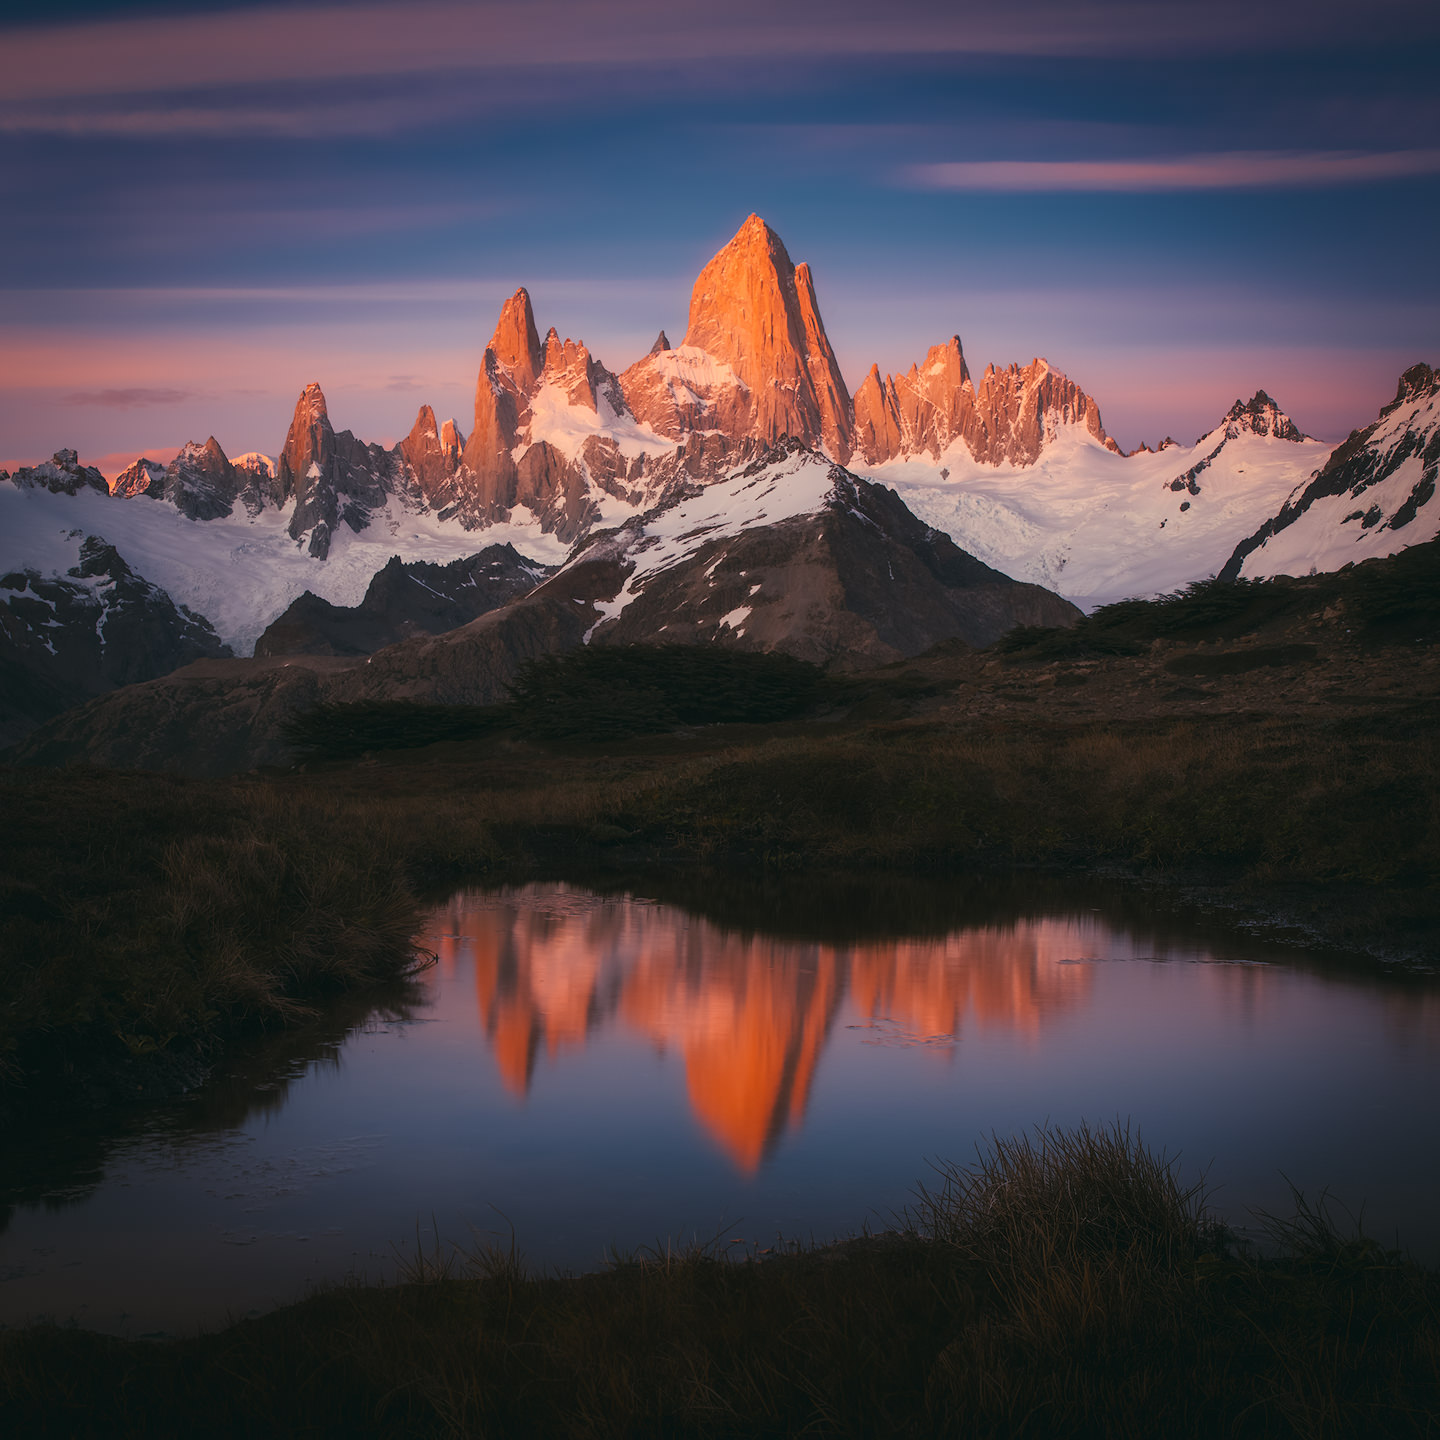 Fitz Roy reflected in a pond at sunrise.